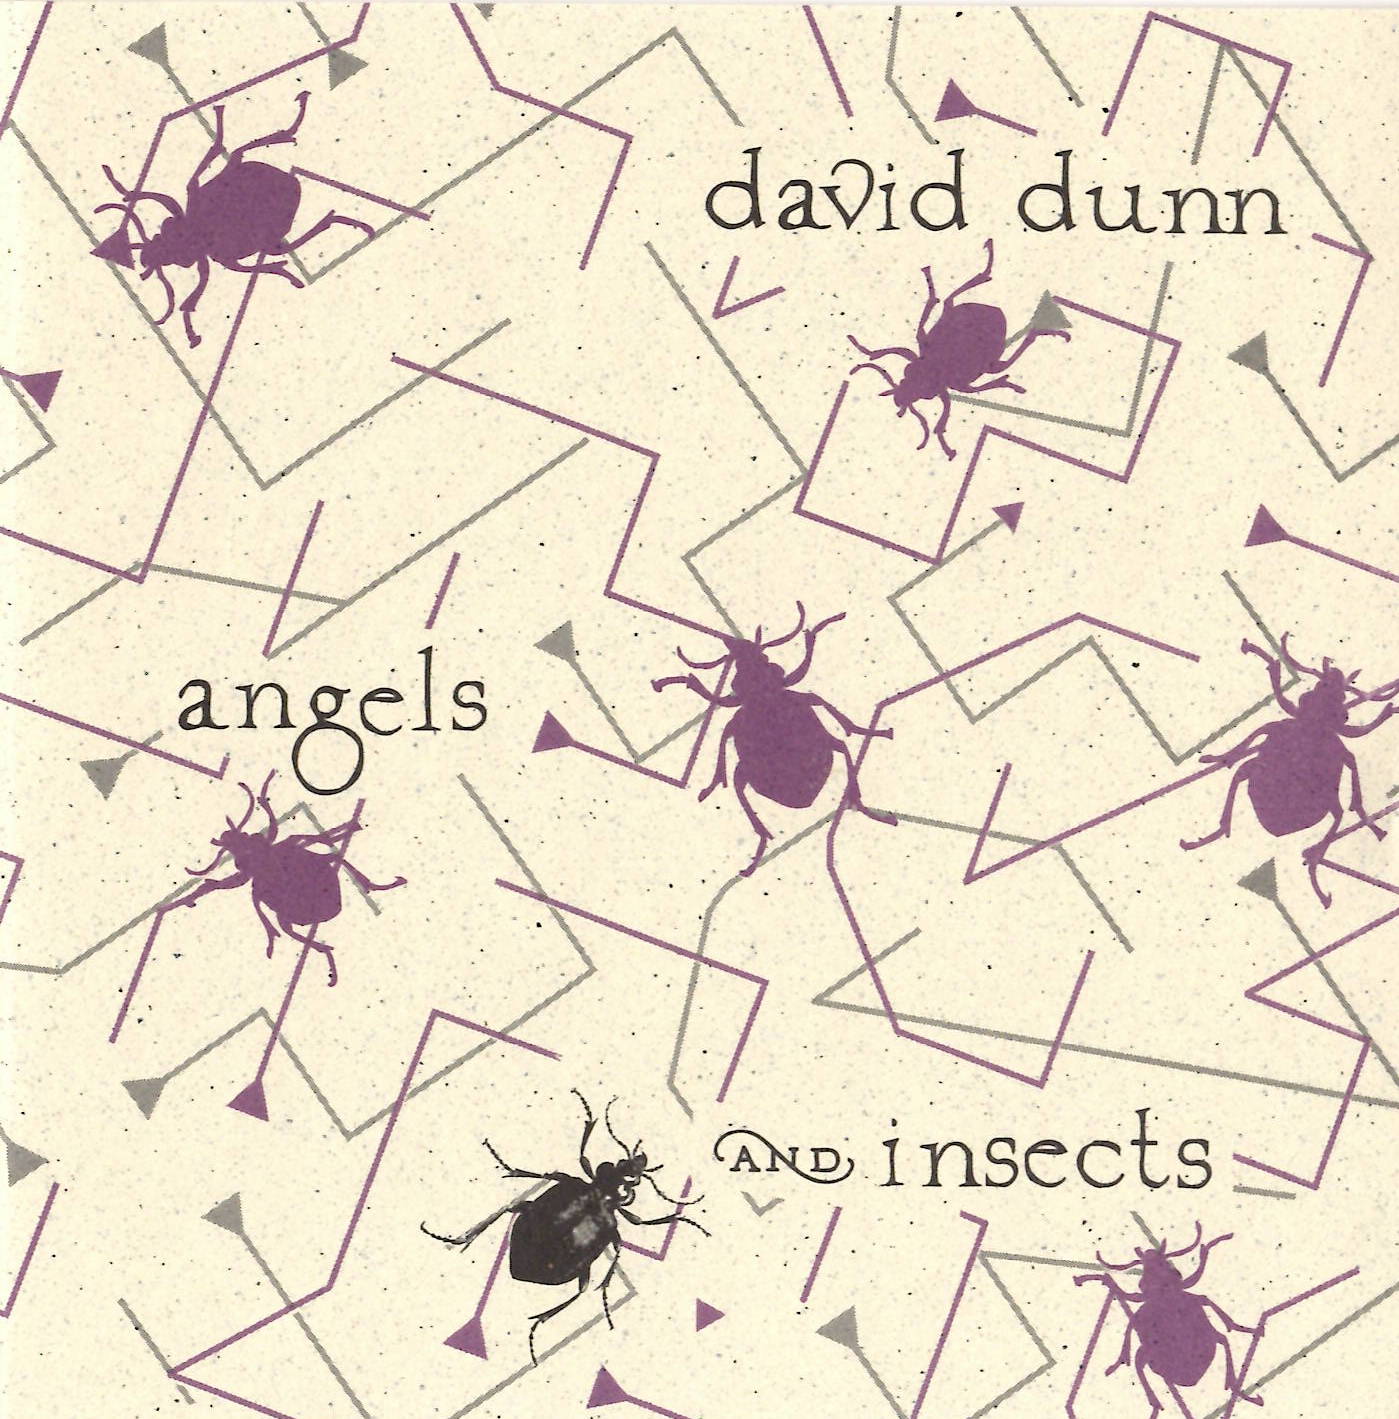 David Dunn, Angels and Insects